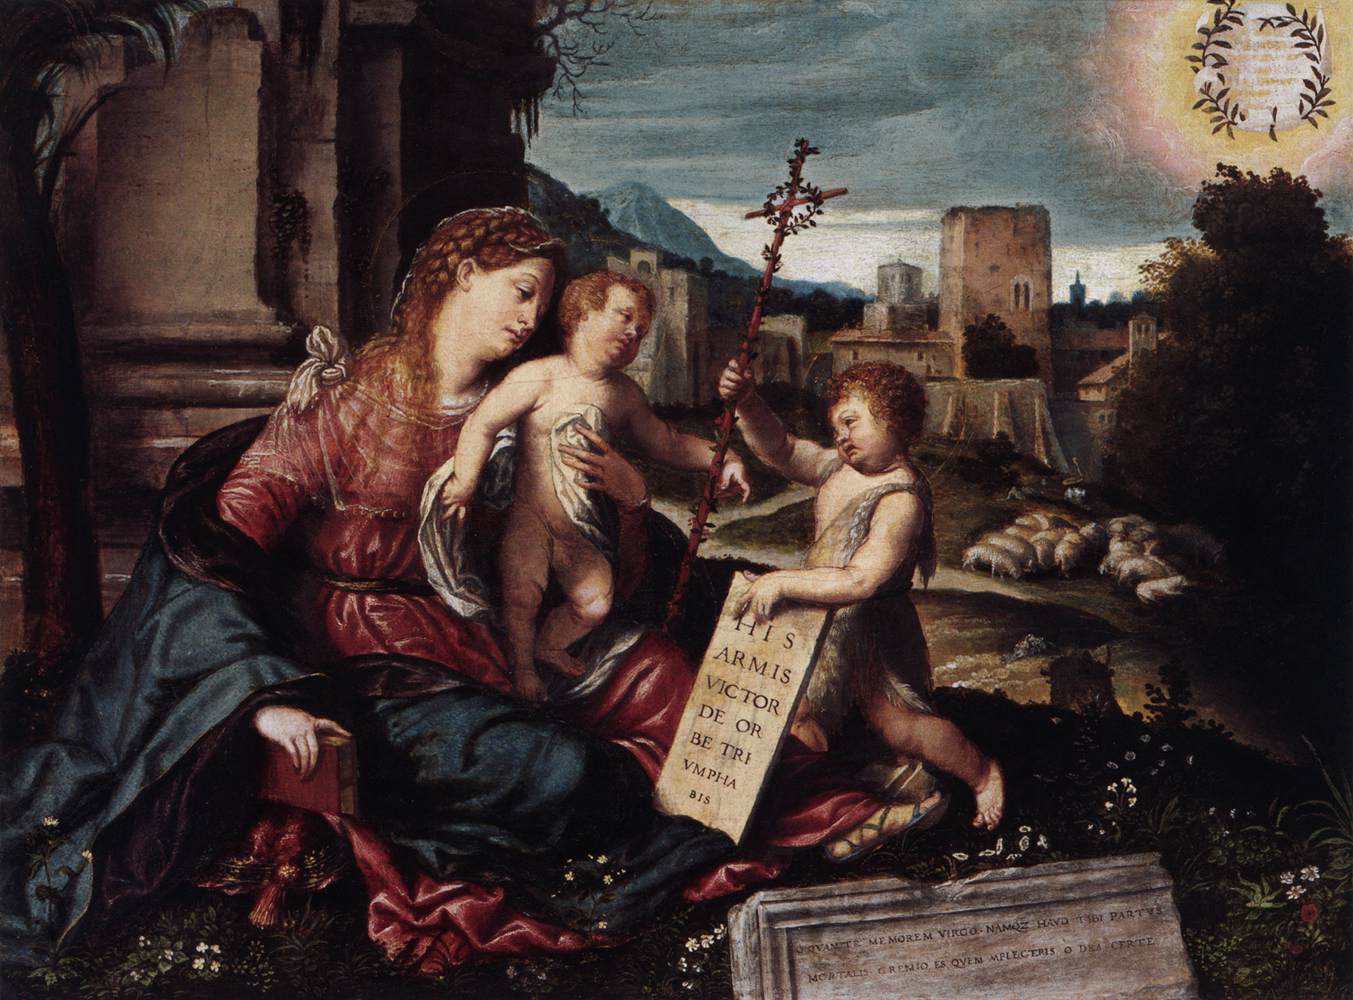 The Virgin with the Child and the Young Saint John